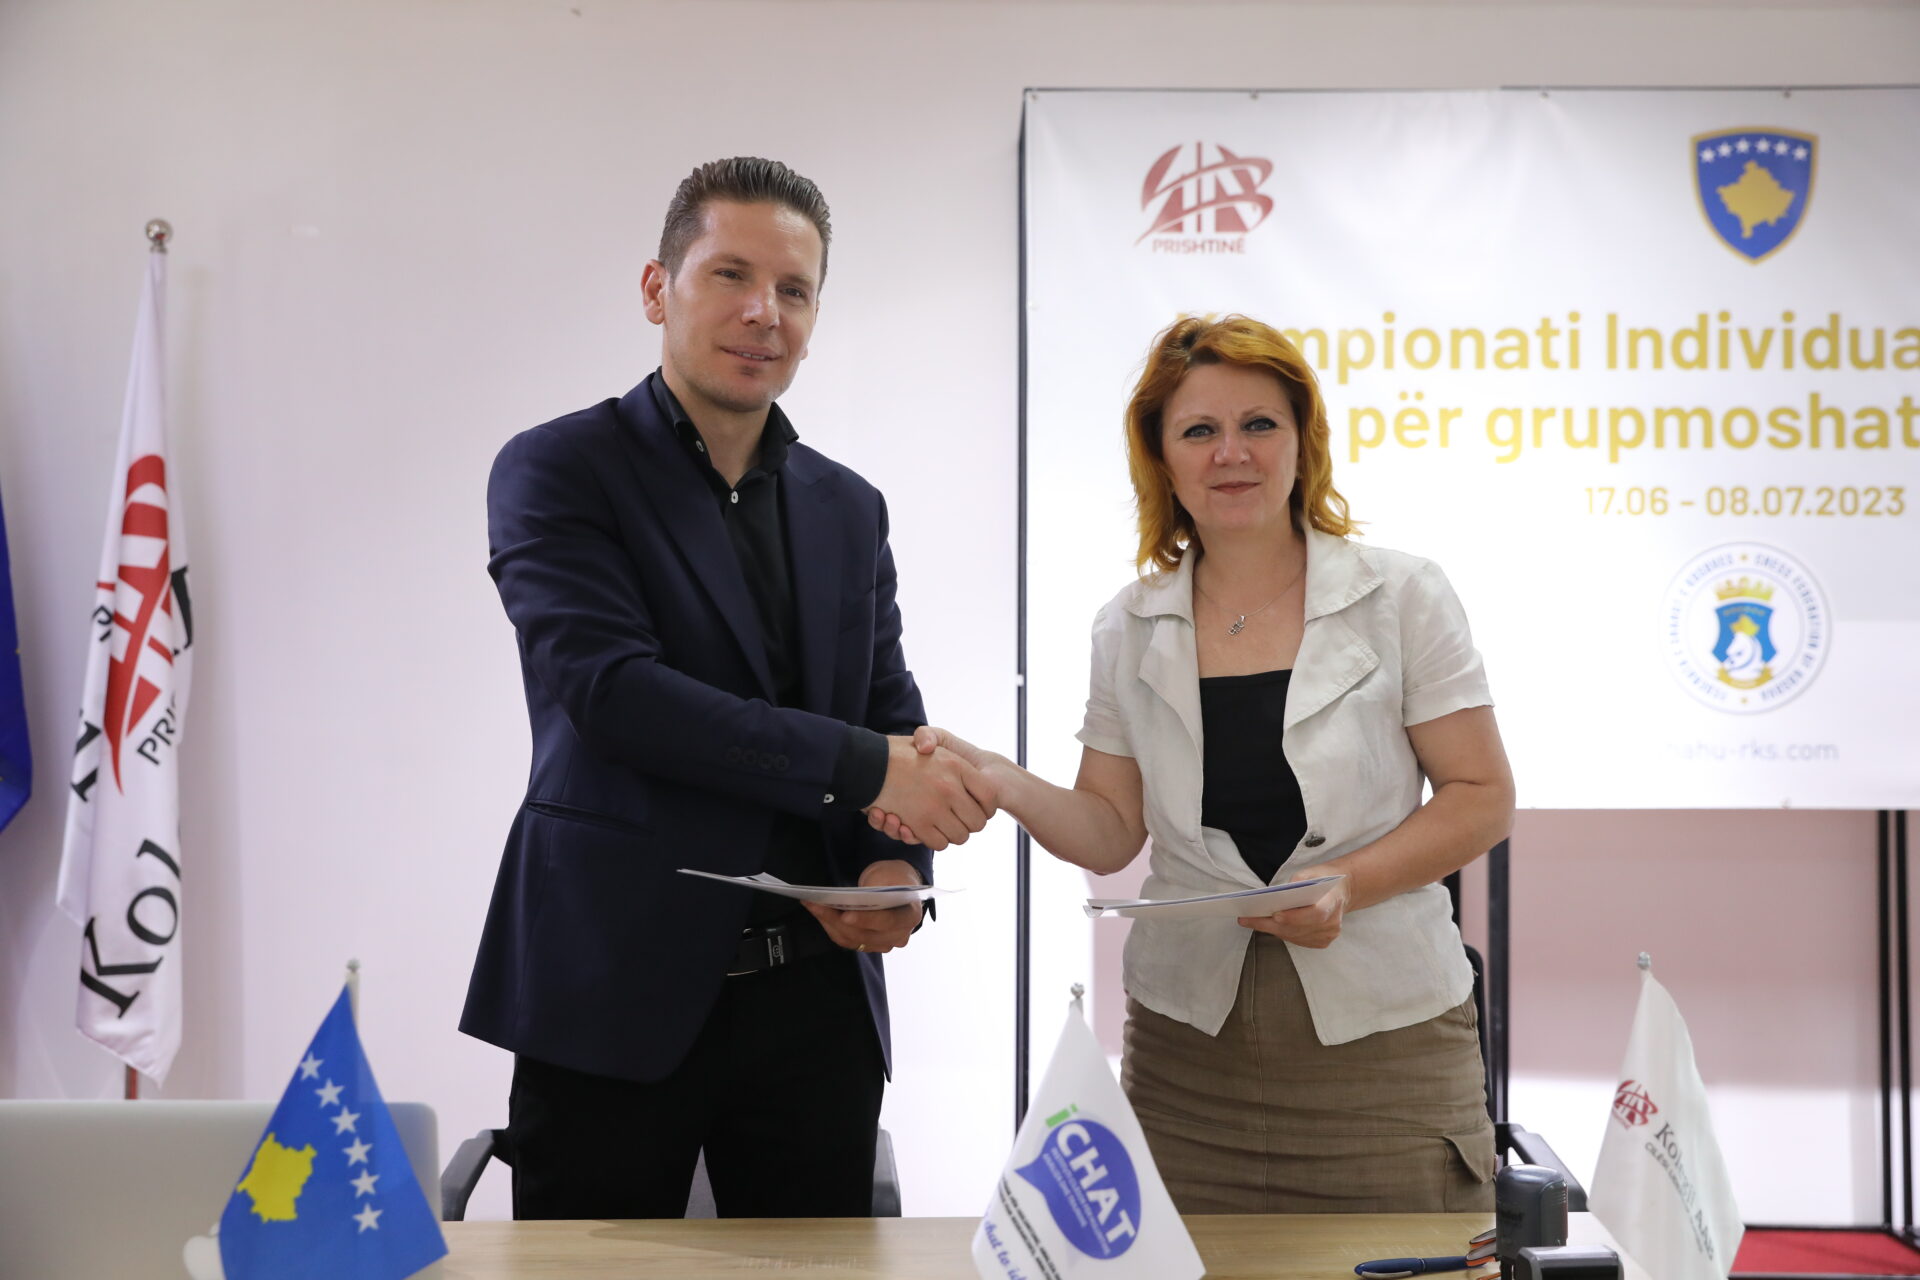 AAB College signs cooperation agreement with iCHAT